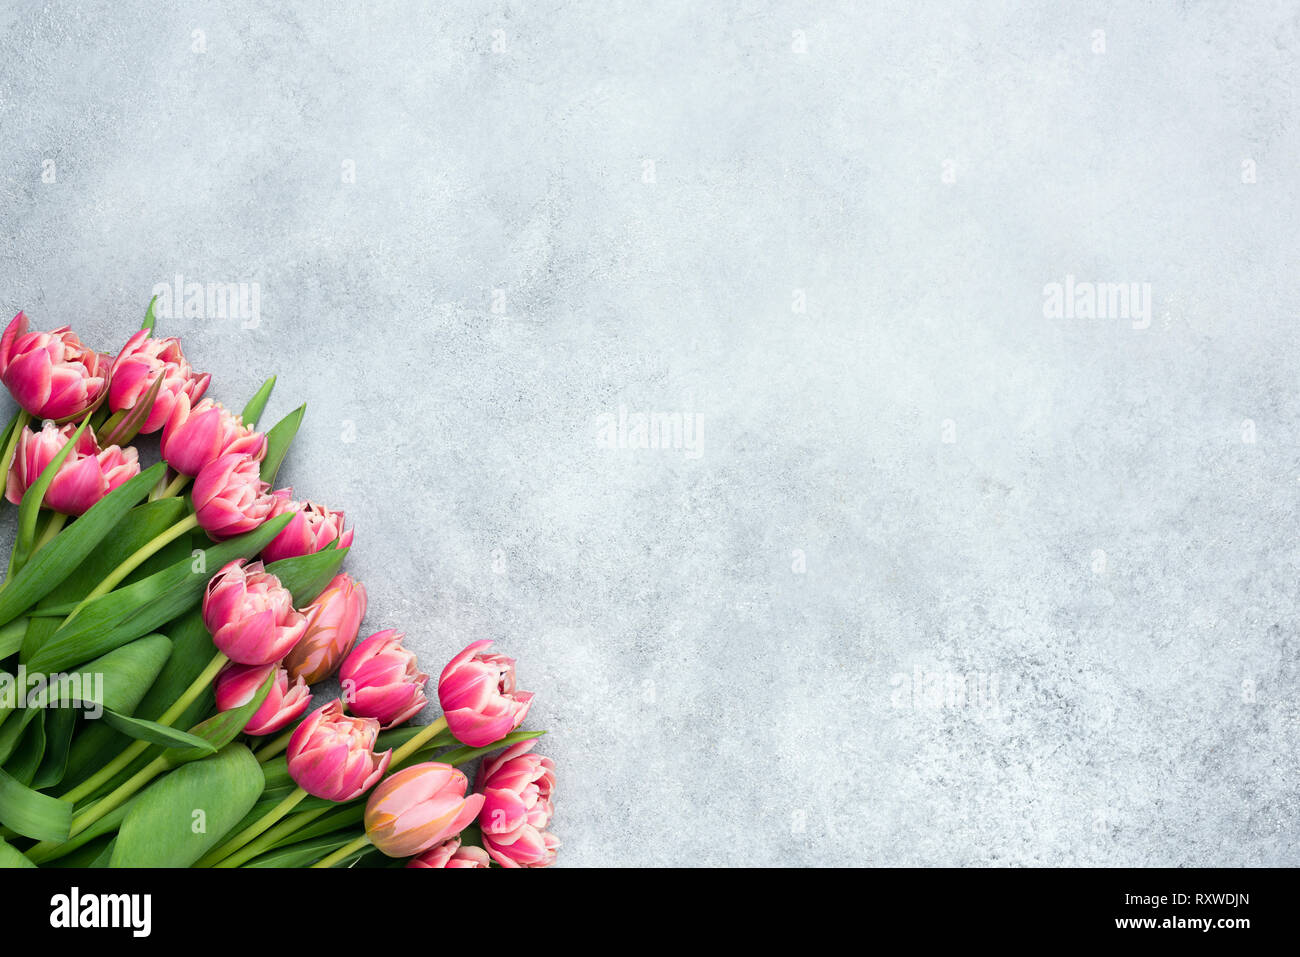 Pink peony tulips on grey concrete background. Floral background with copy space for text. Design template, greeting or invitation card Stock Photo